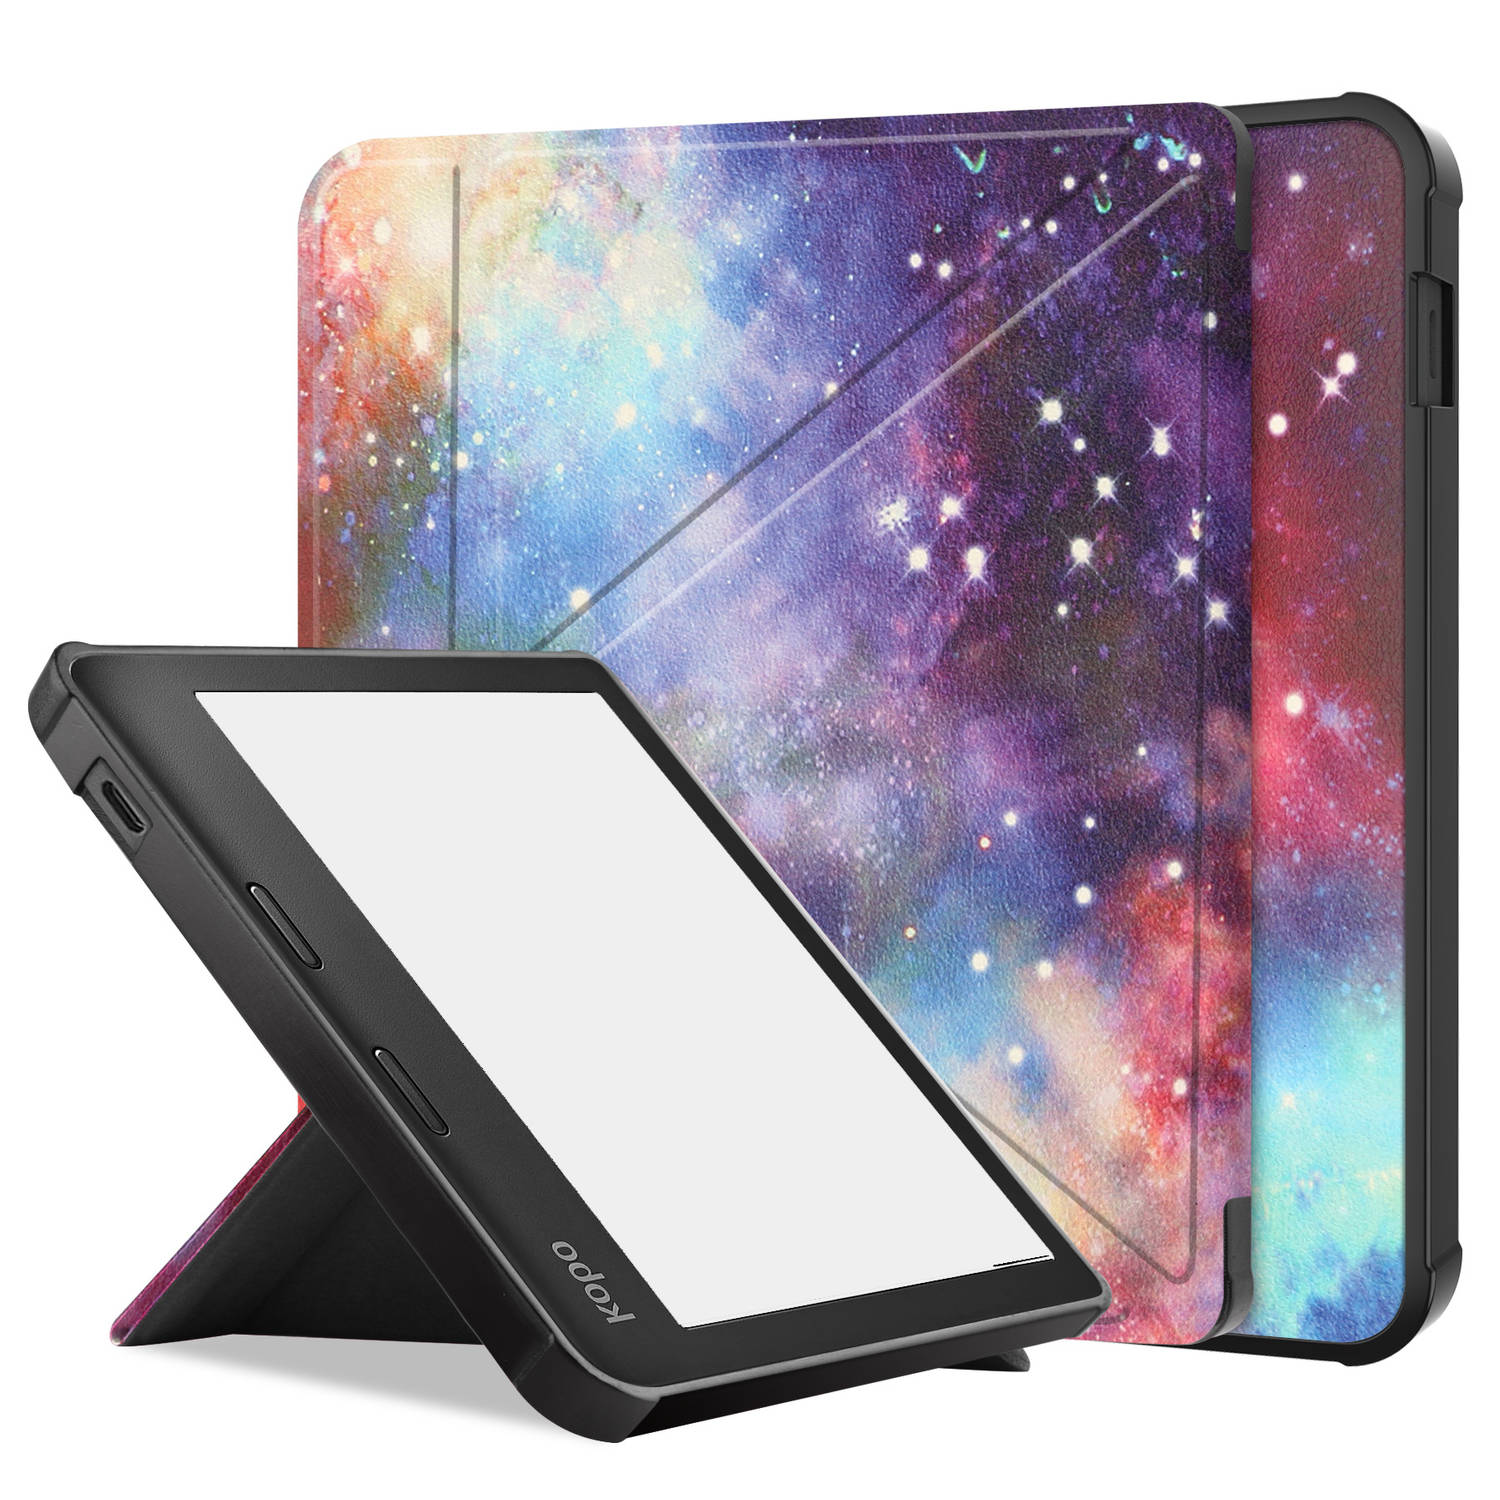 Basey Kobo Sage Hoesje Bookcase Cover Hoes Kobo Sage Case Cover Hoes Galaxy